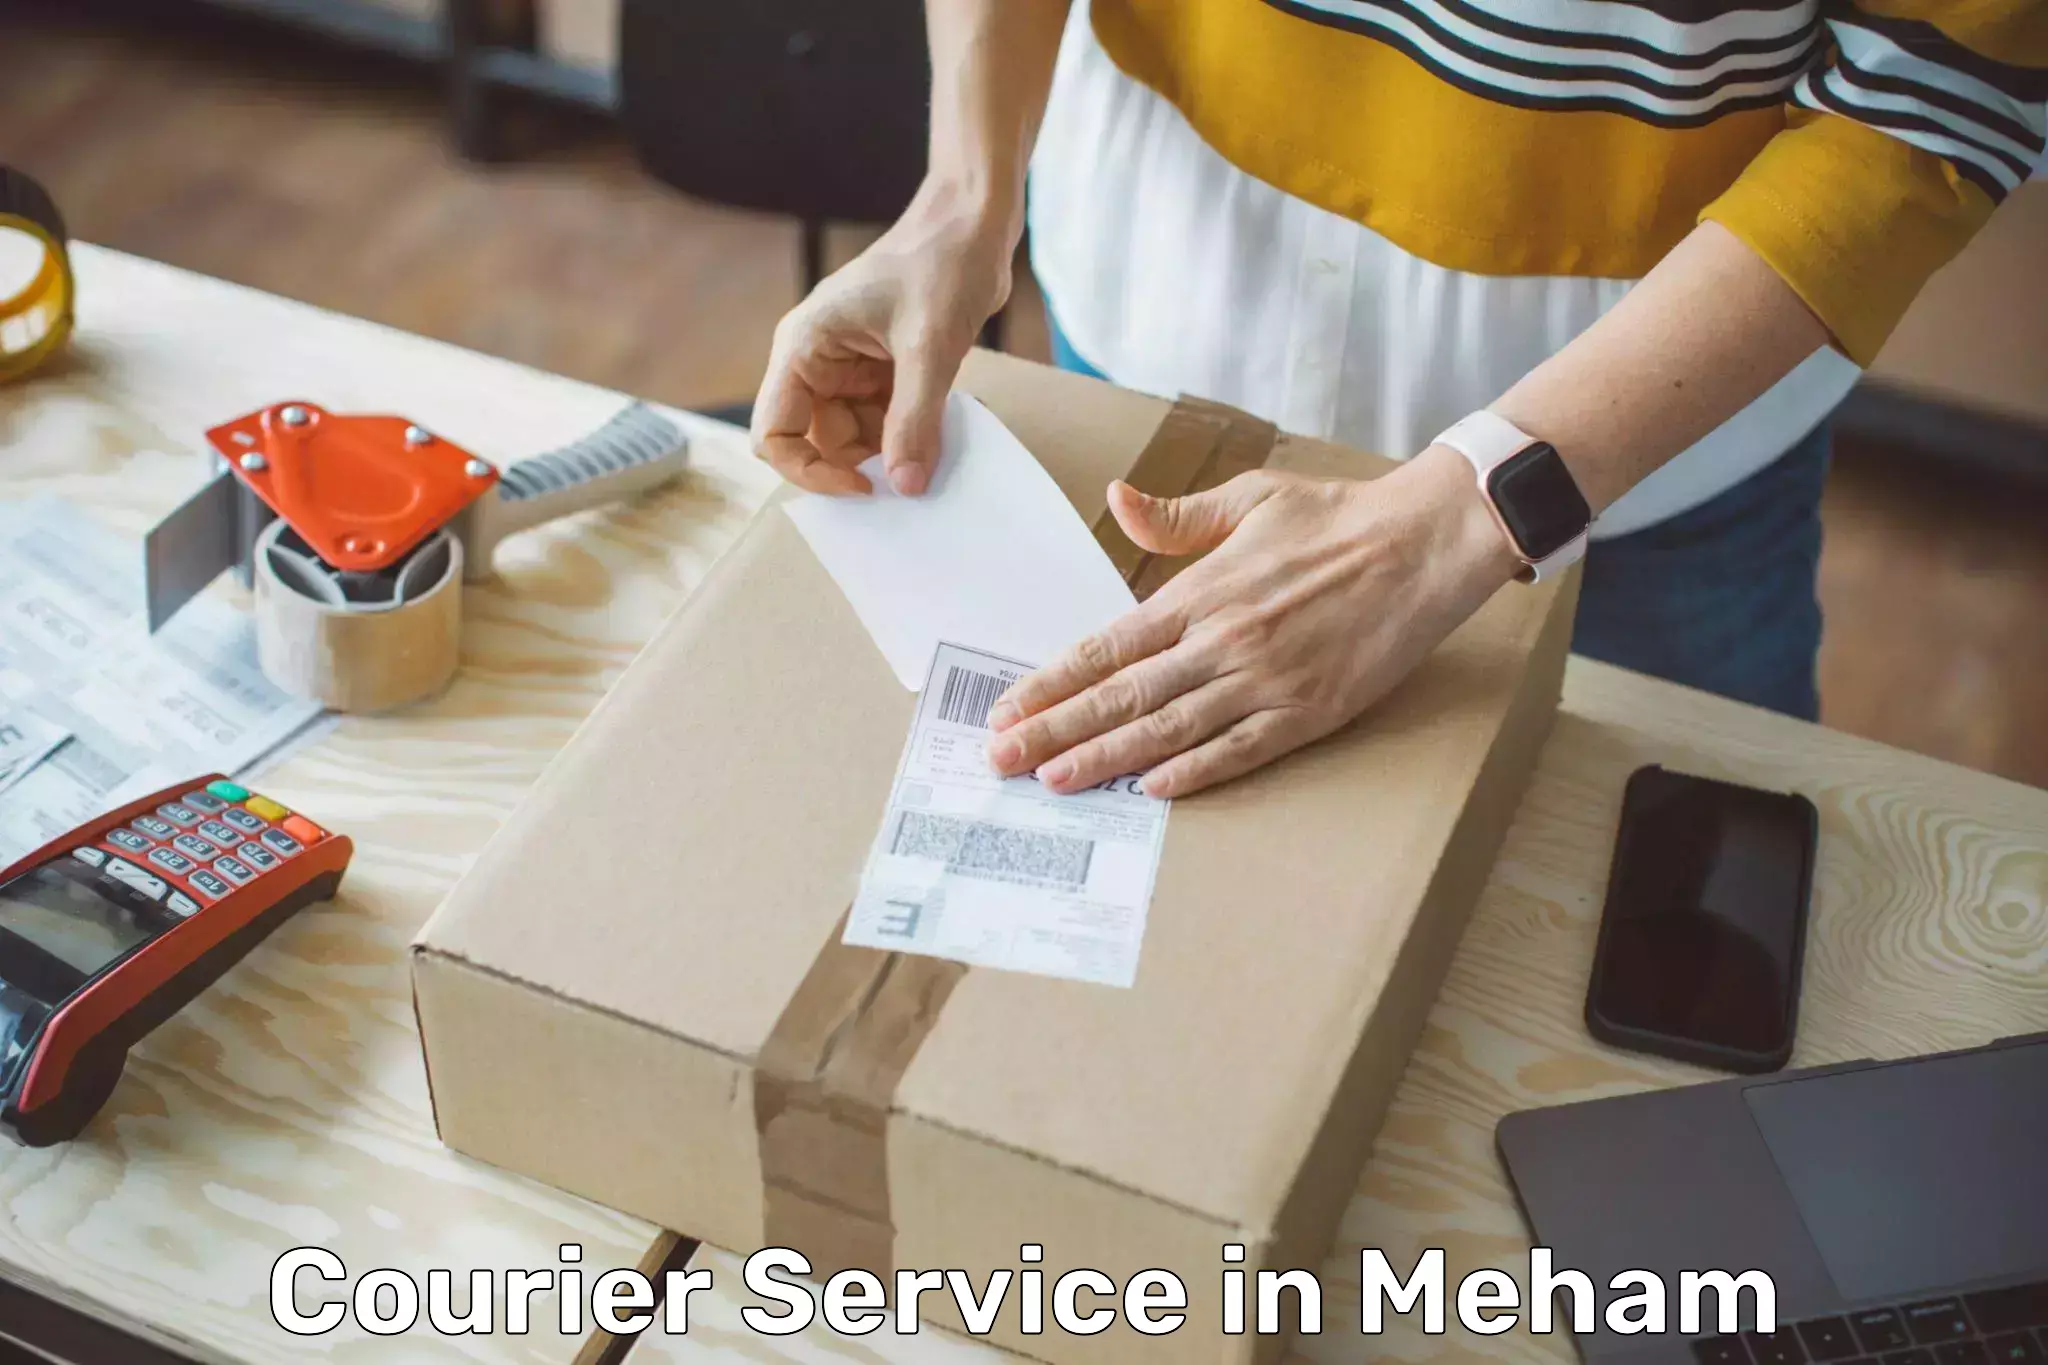 24-hour courier service in Meham